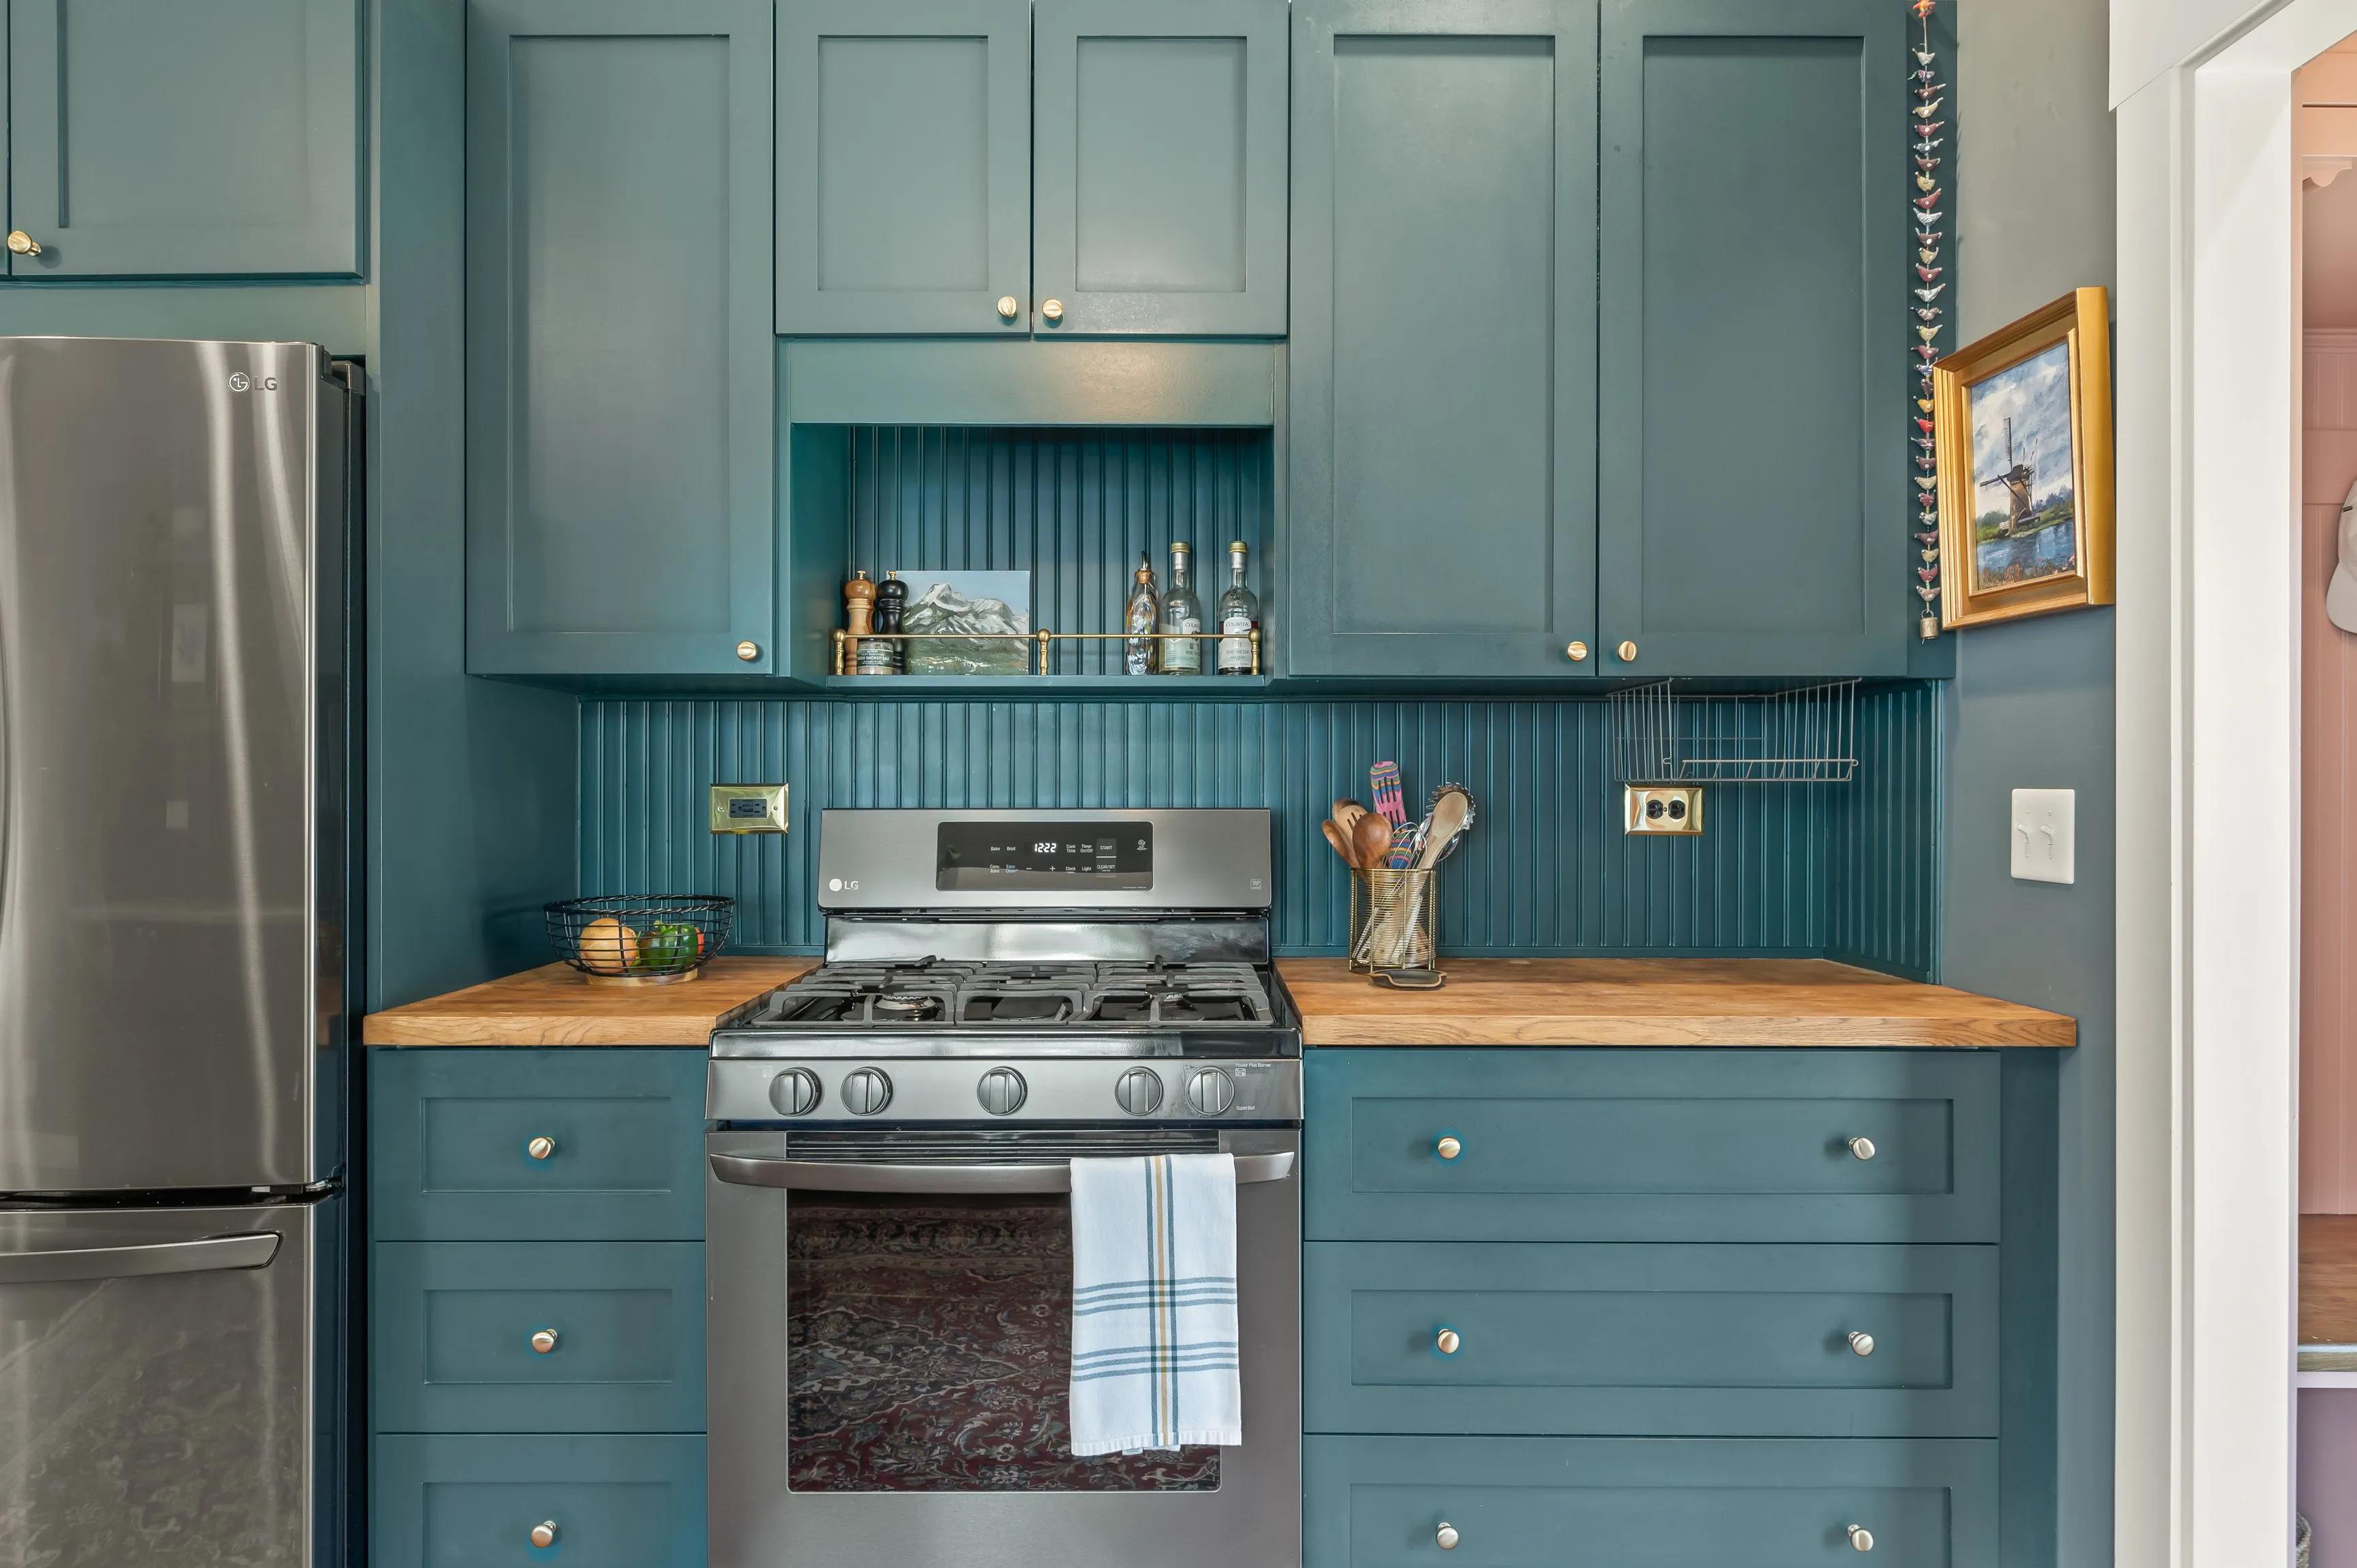 Modern kitchen with teal cabinetry, stainless steel appliances, and wooden countertops.